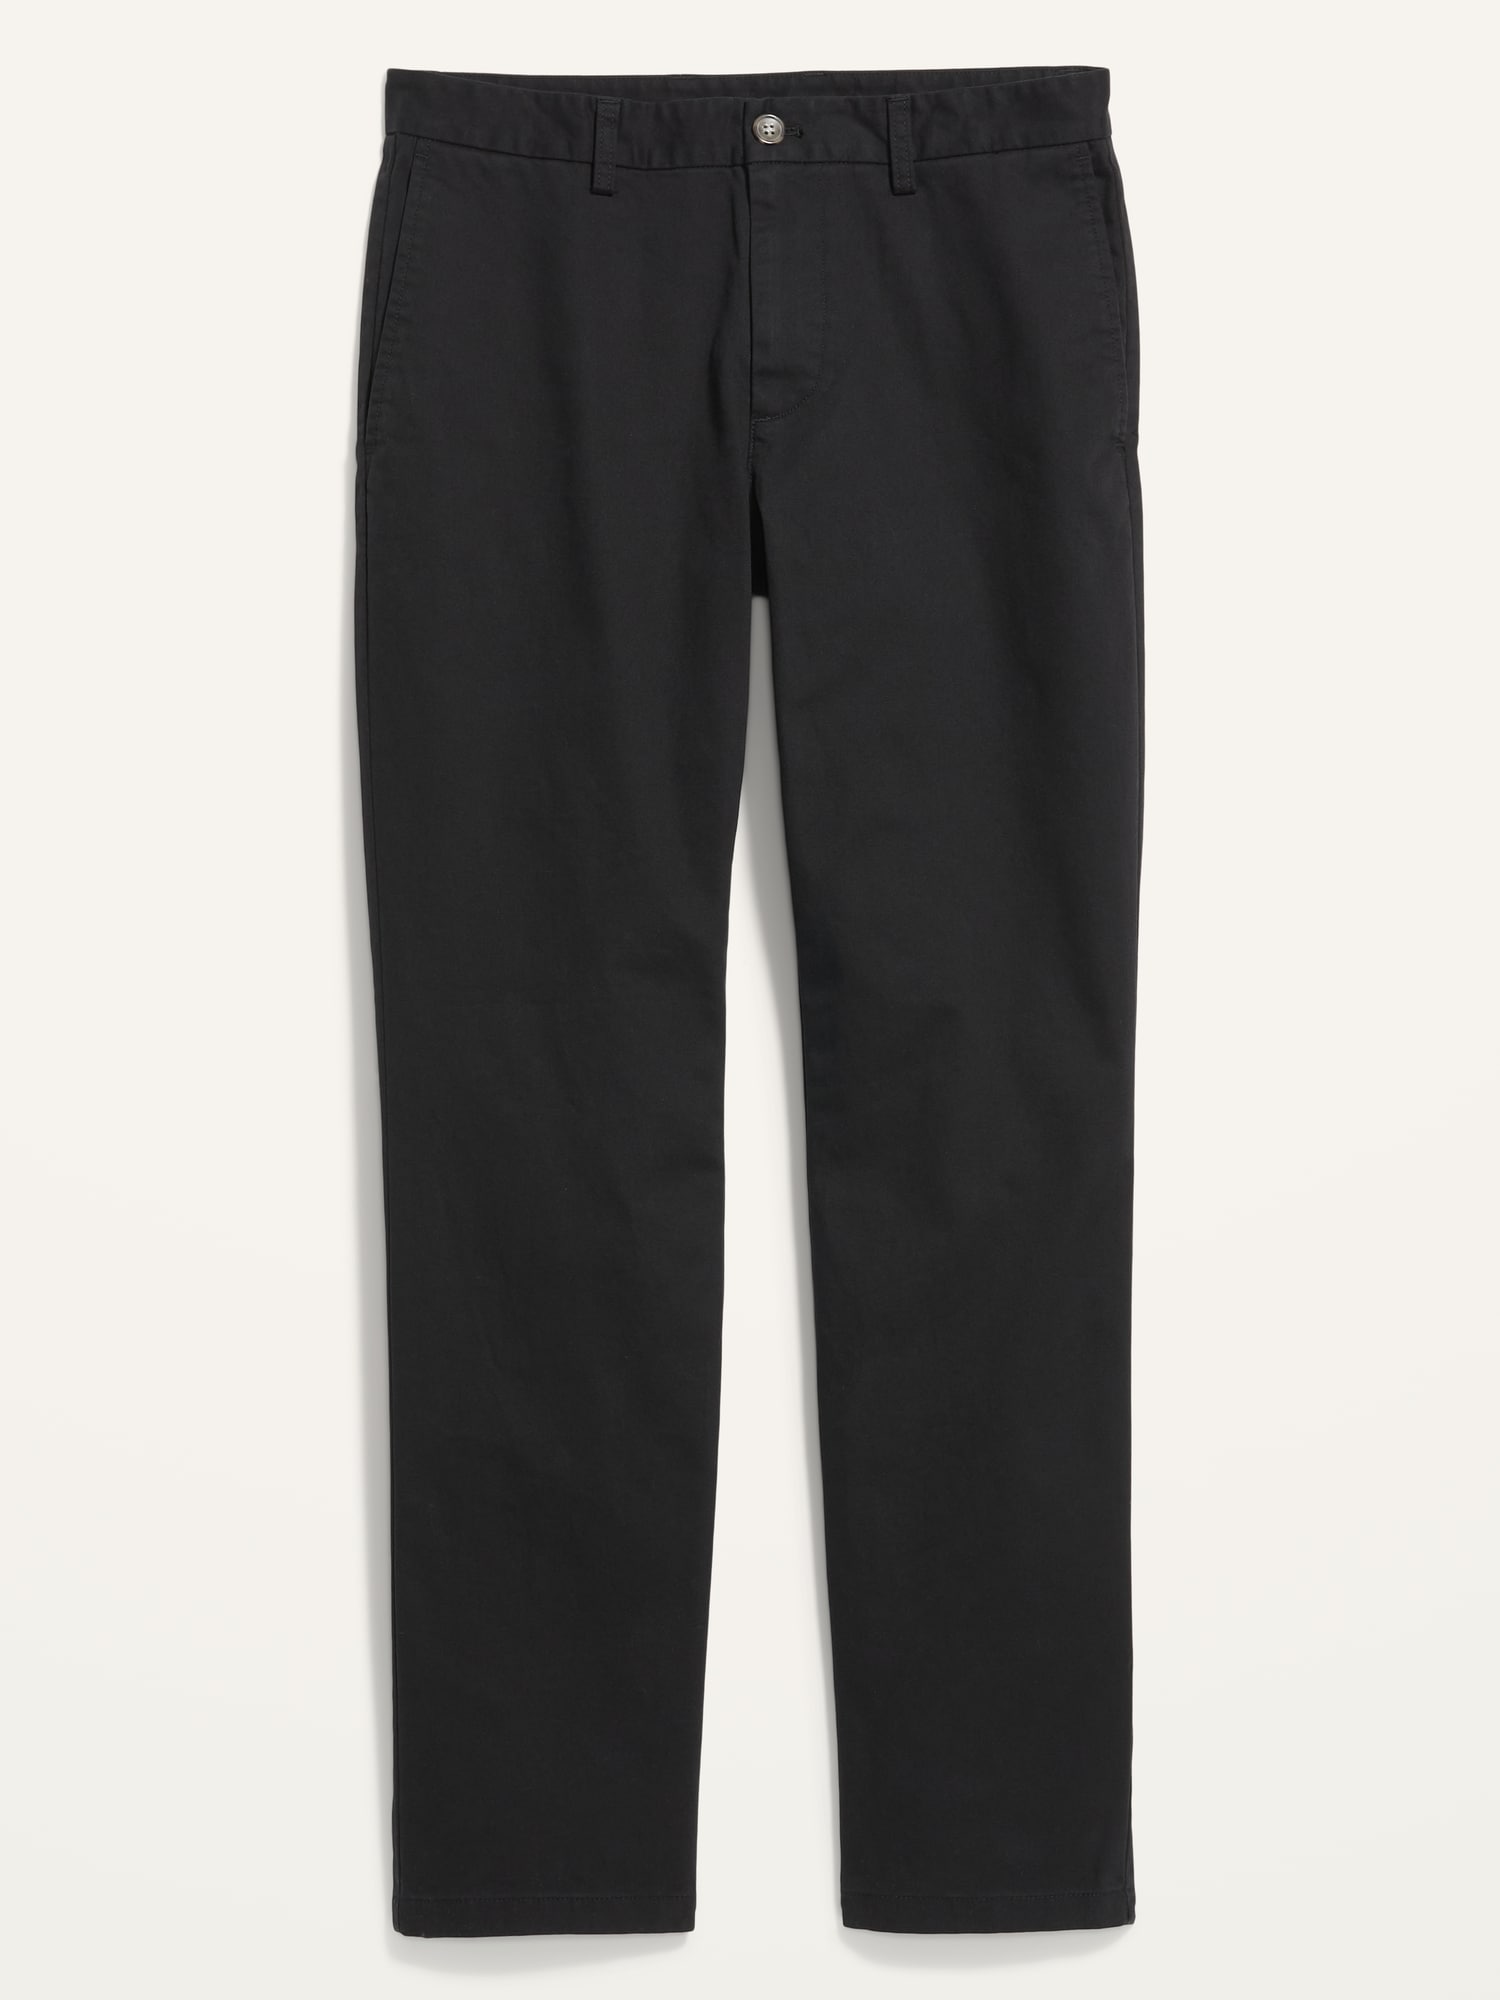 Old Navy Straight Built-In Flex Rotation Chino Pants black. 1